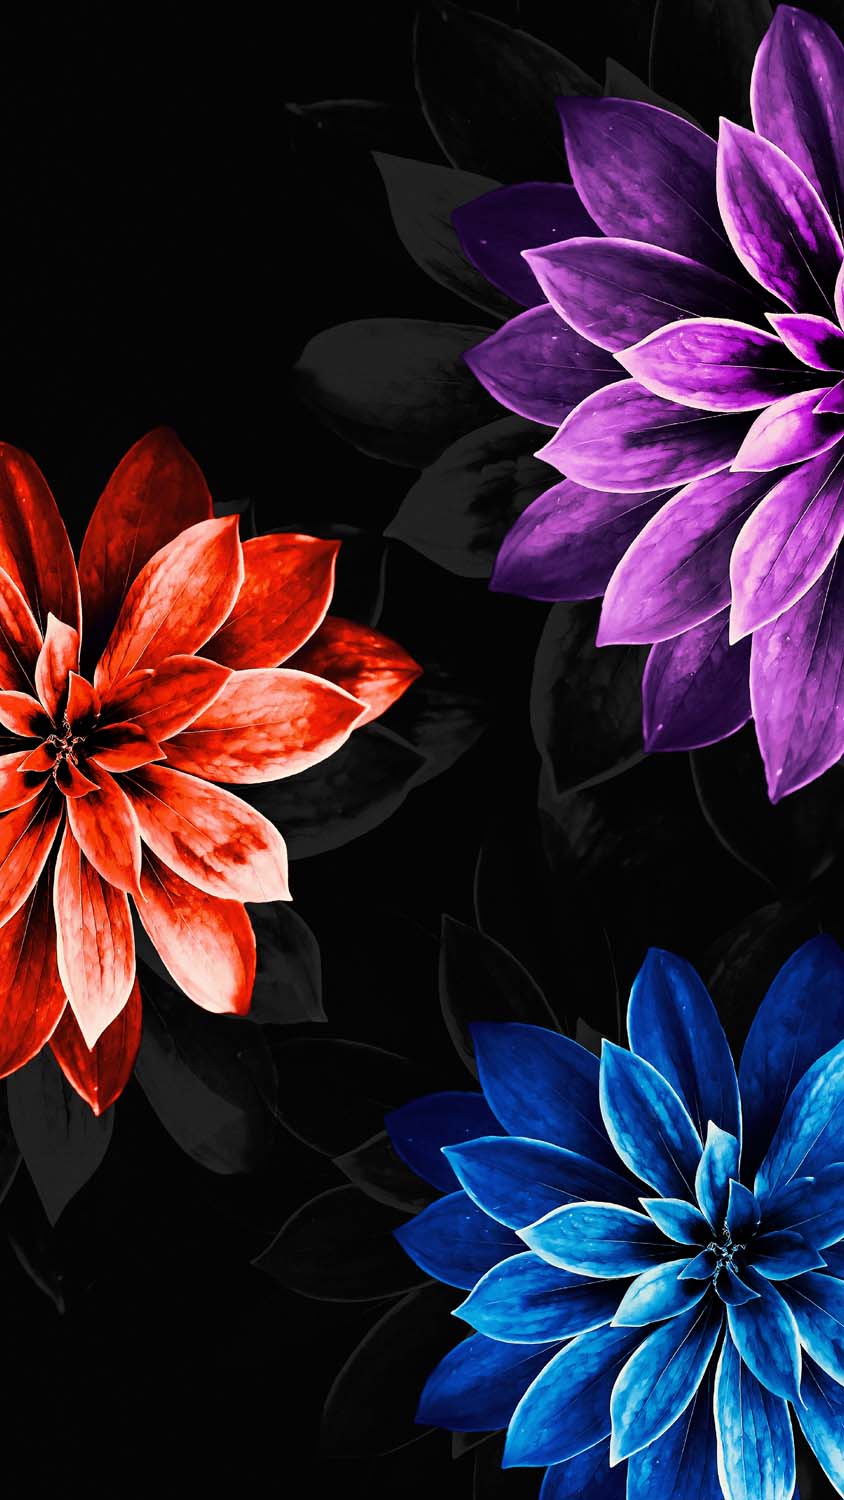 Flowers Amoled IPhone Wallpaper HD - IPhone Wallpapers : iPhone ...